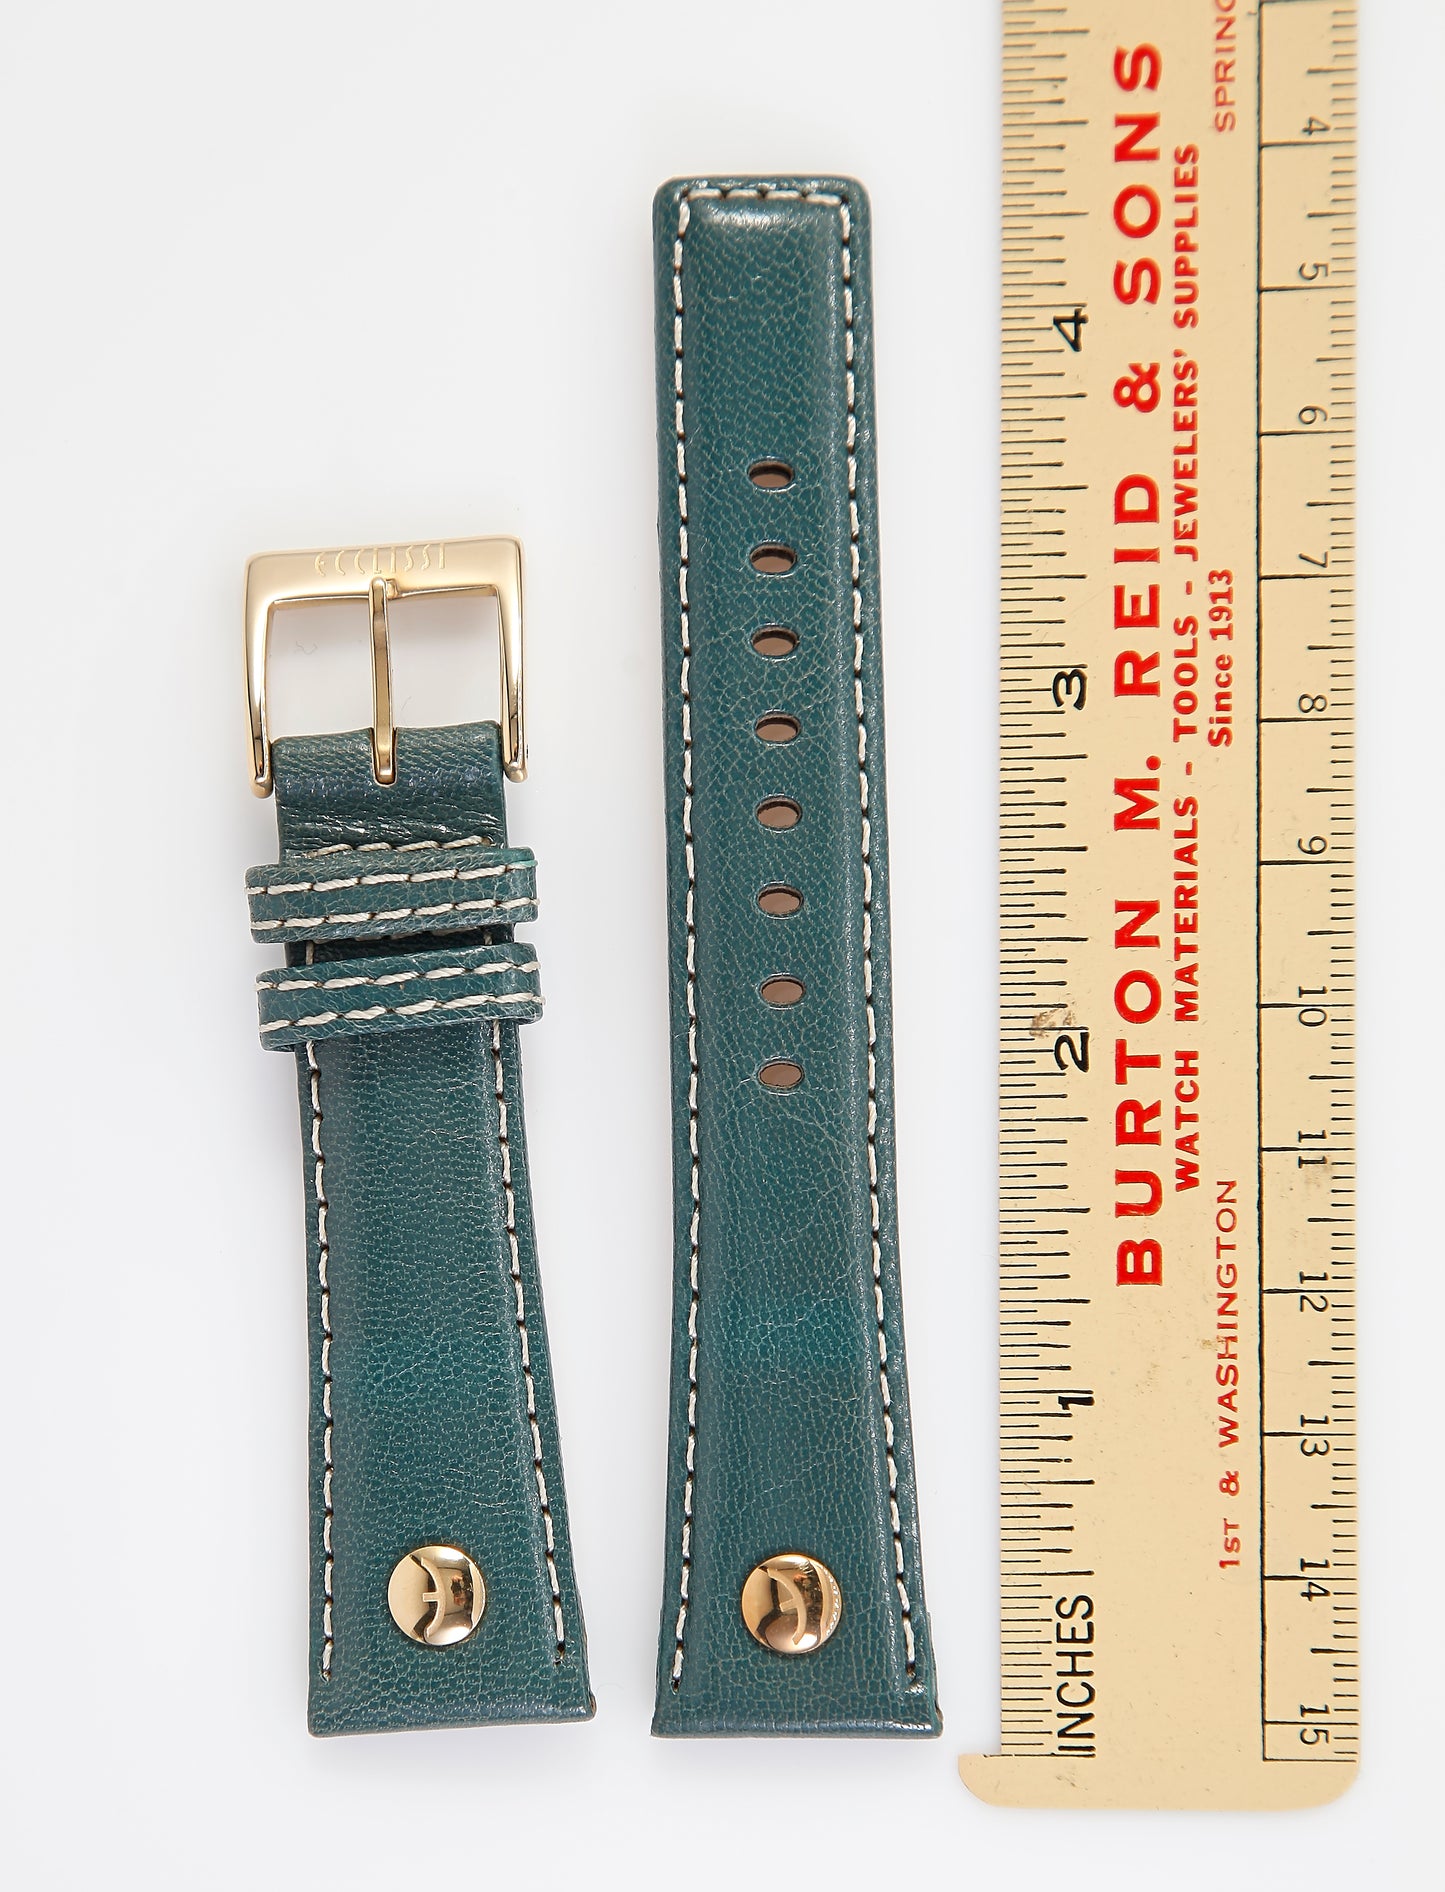 Ecclissi 80250 Olive Leather Strap 20mm x 16mm